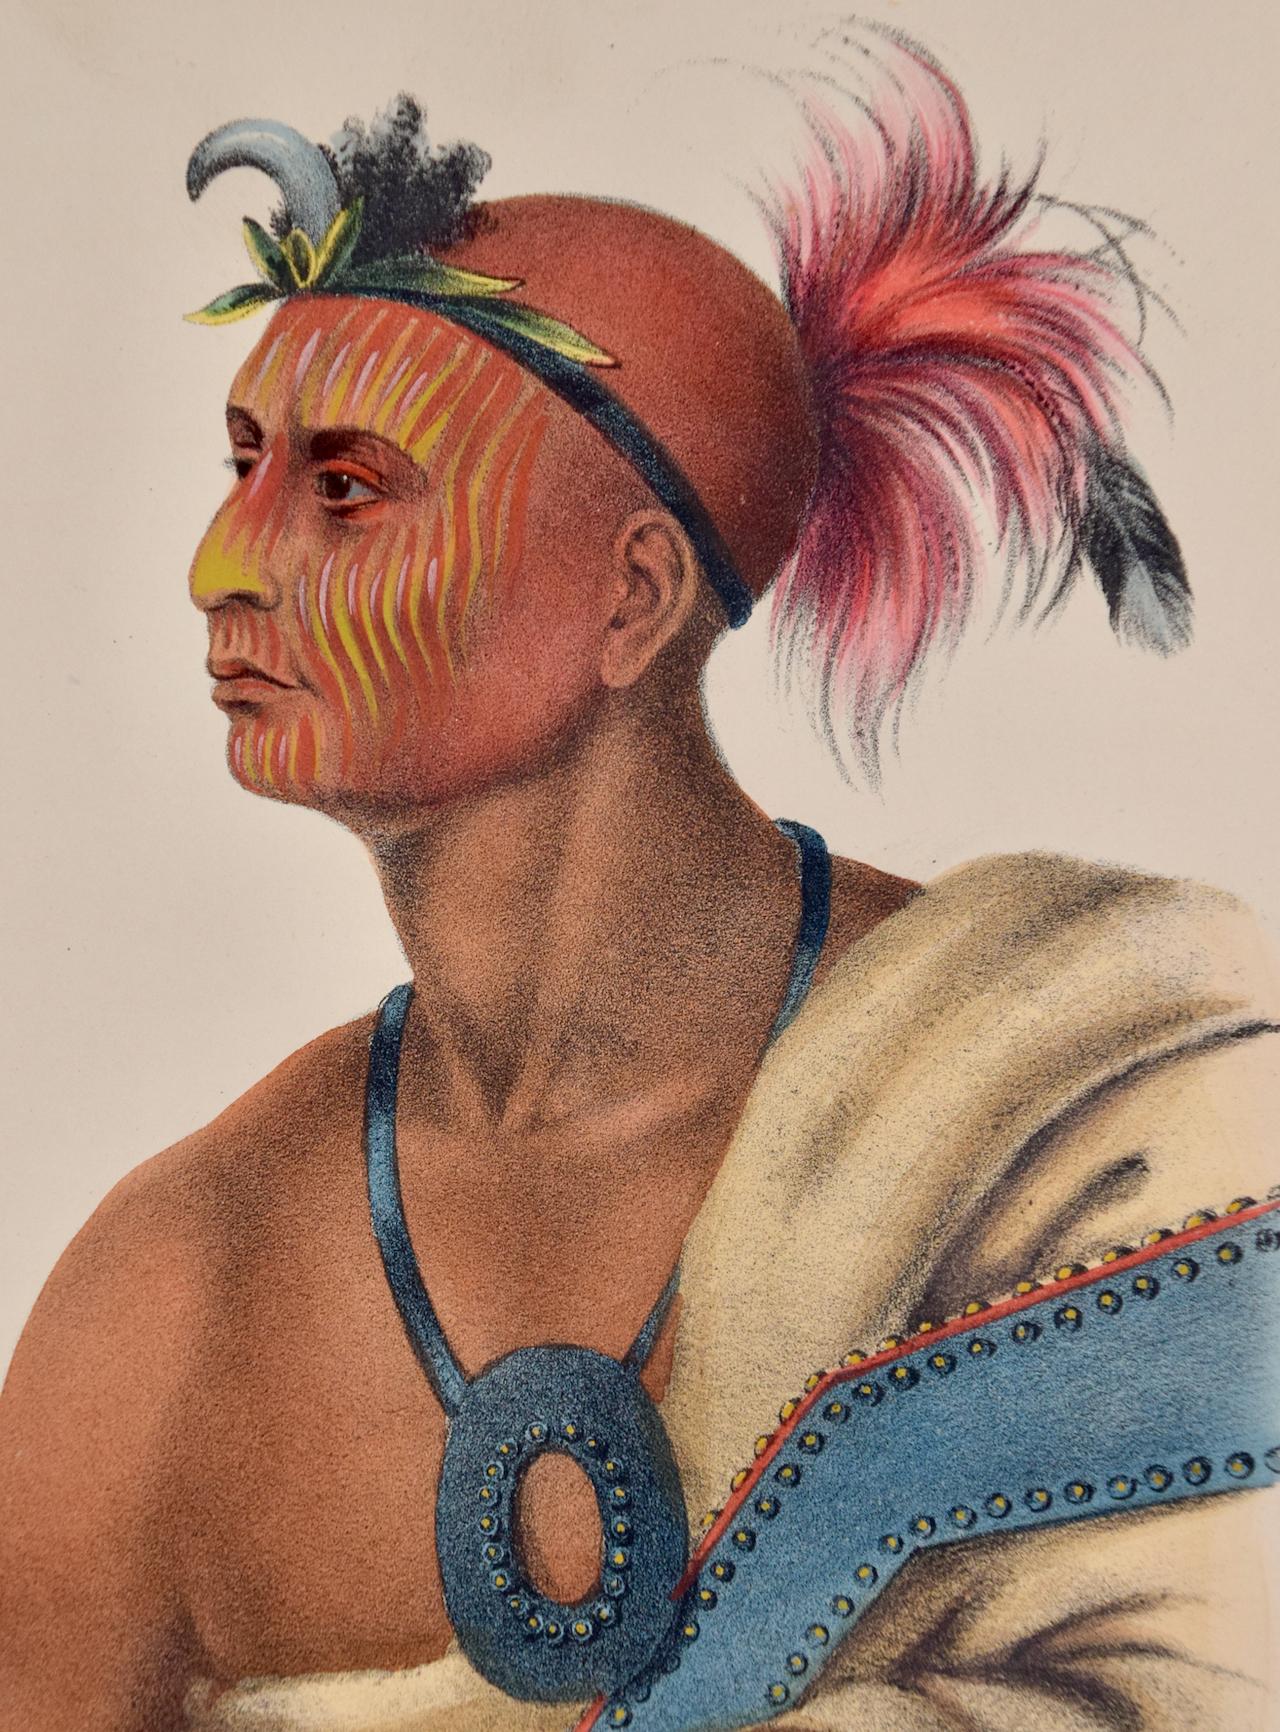 This is an original 19th century hand-colored McKenney and Hall lithograph of a Native American entitled 